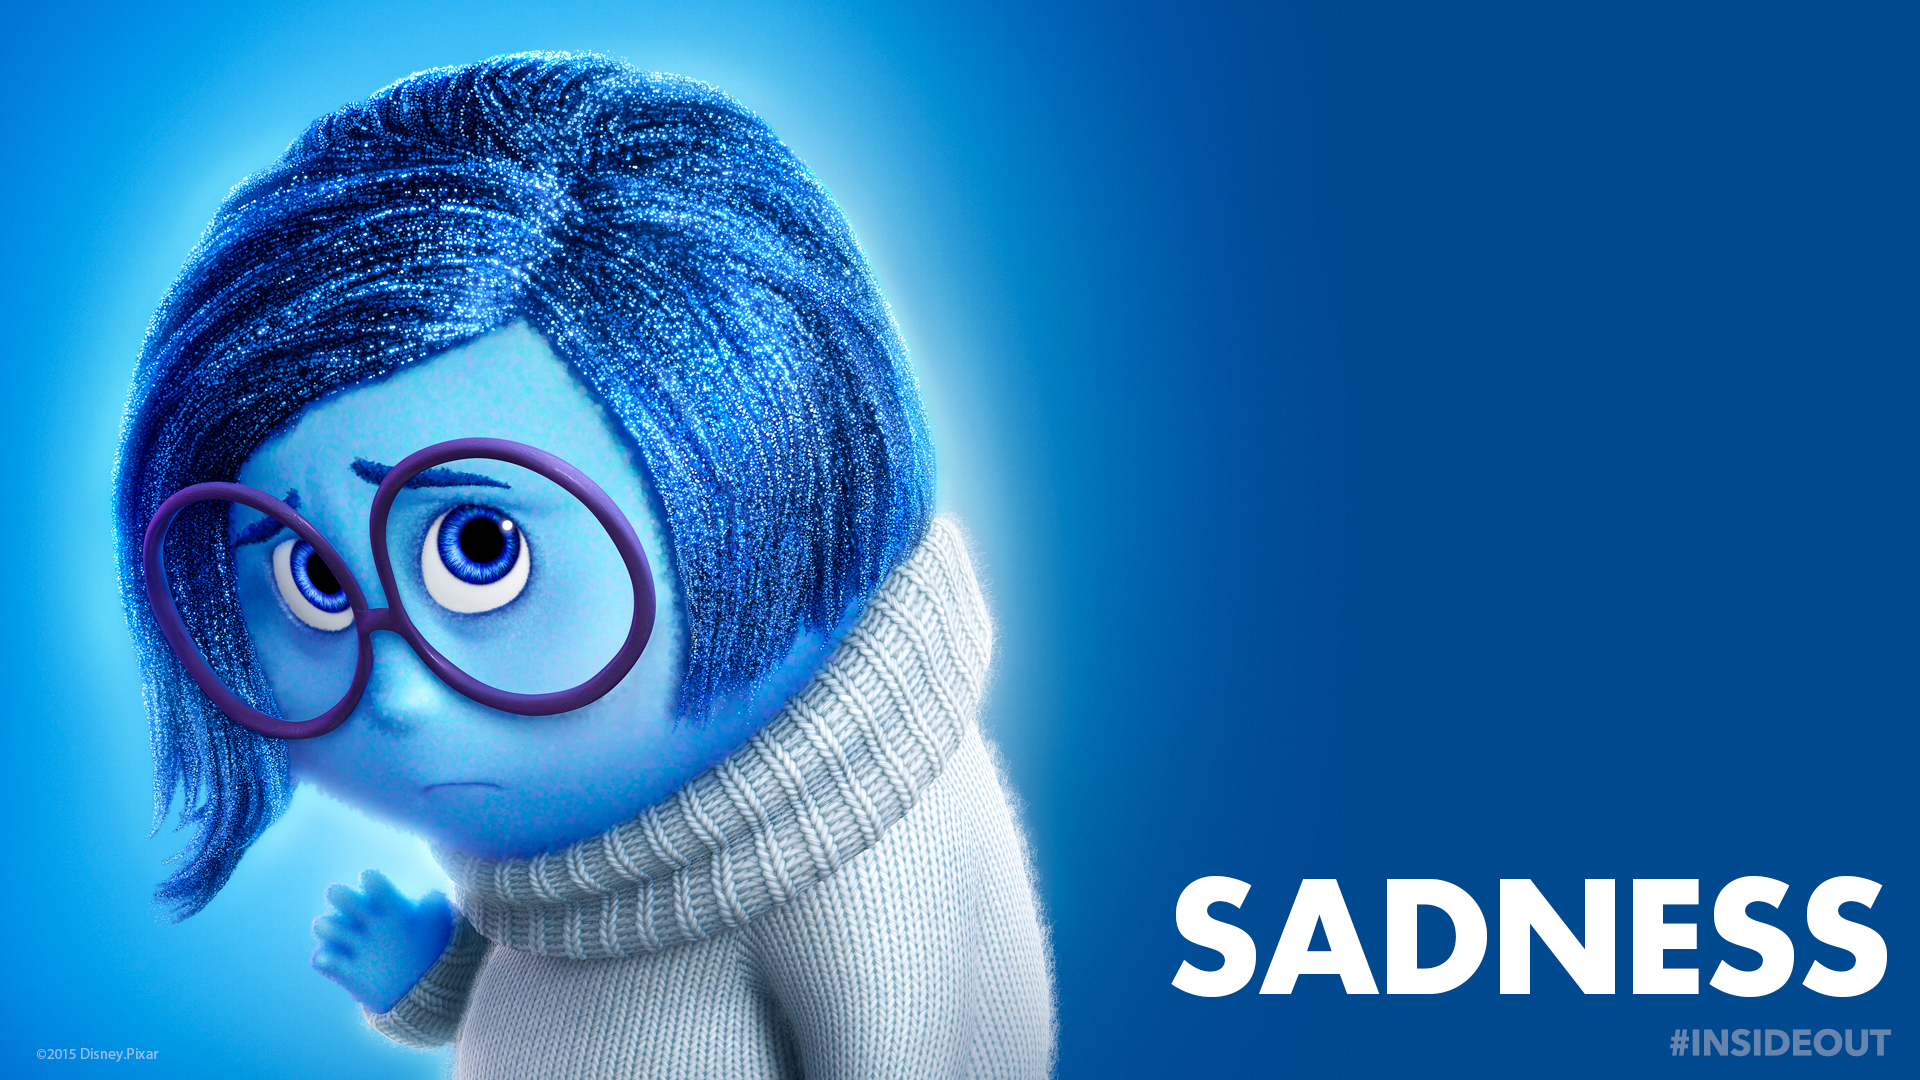  inside out Sadness wide image inside out Sadness wide wallpaper